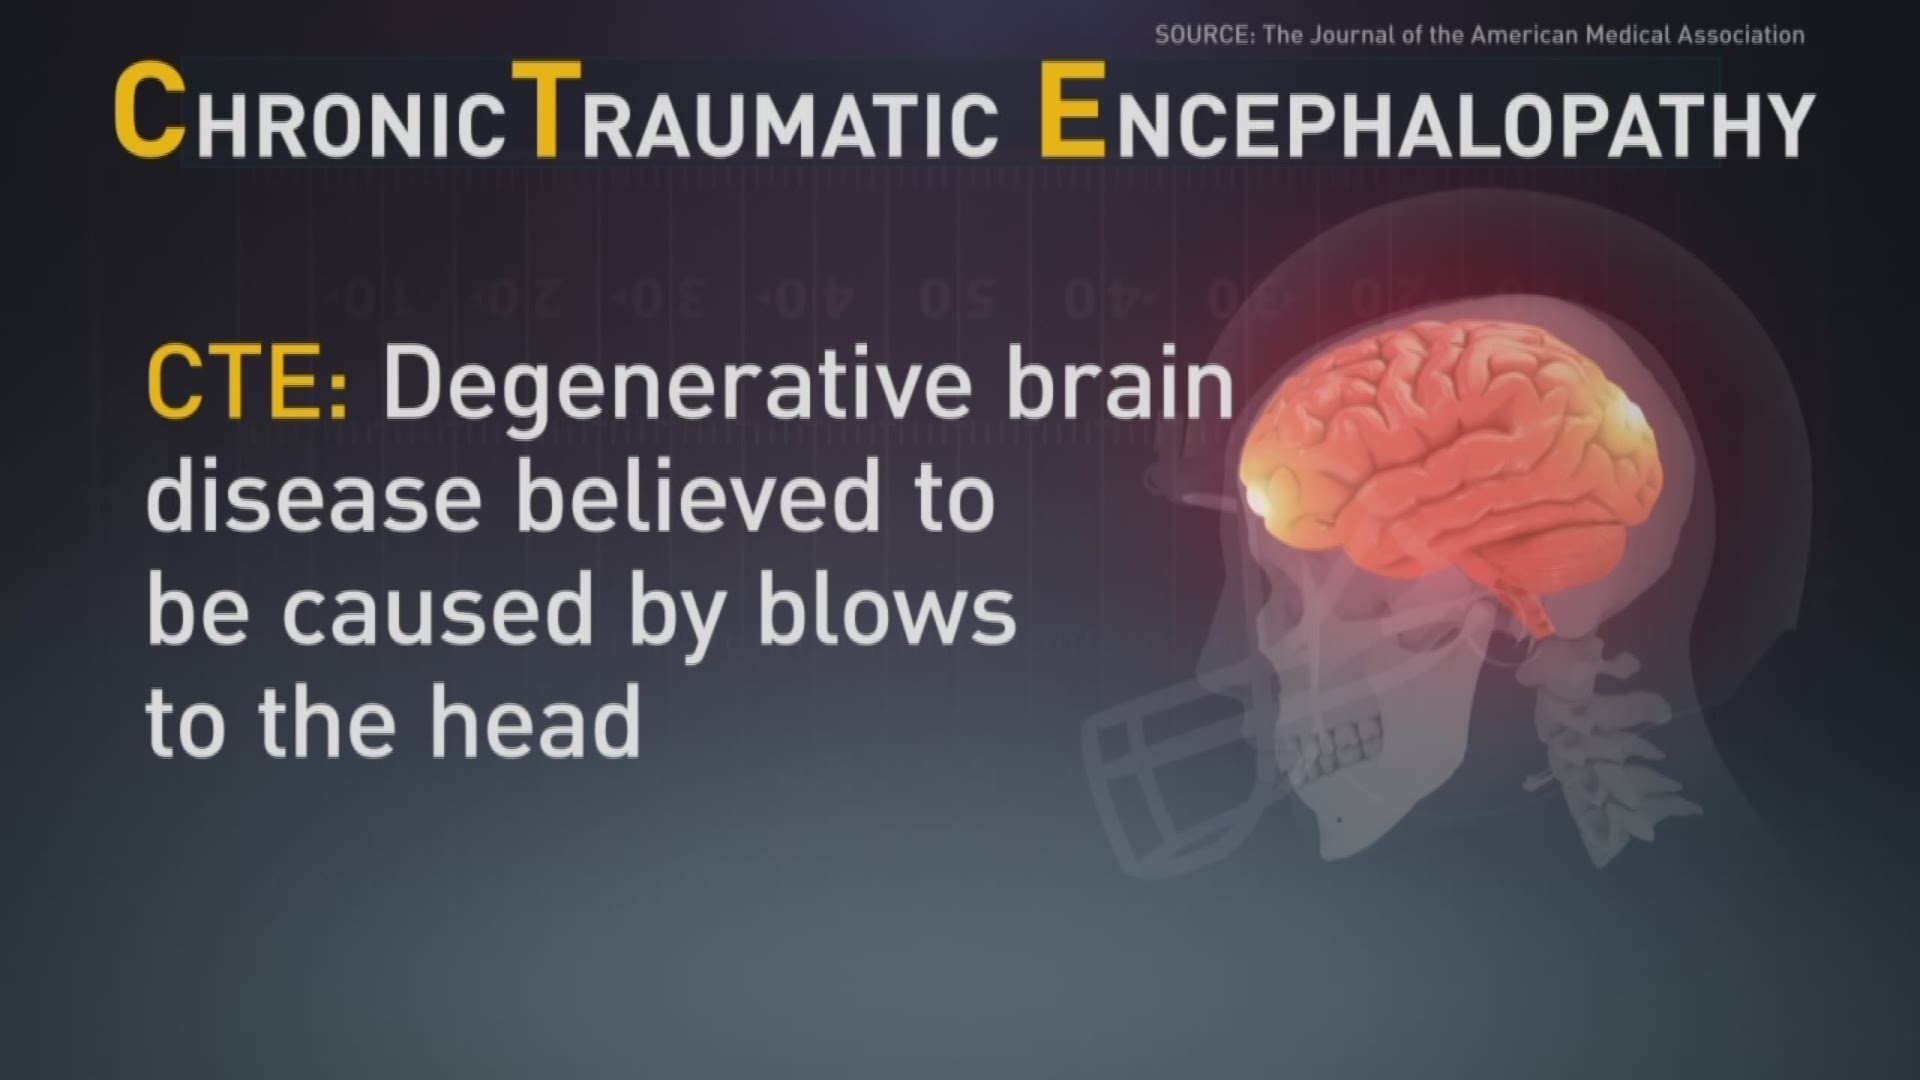 A degenerative brain disease caused by repeated head trauma has been shown in almost 90 percent of the brains studied by Boston University researchers. The brains studied were those of football players.